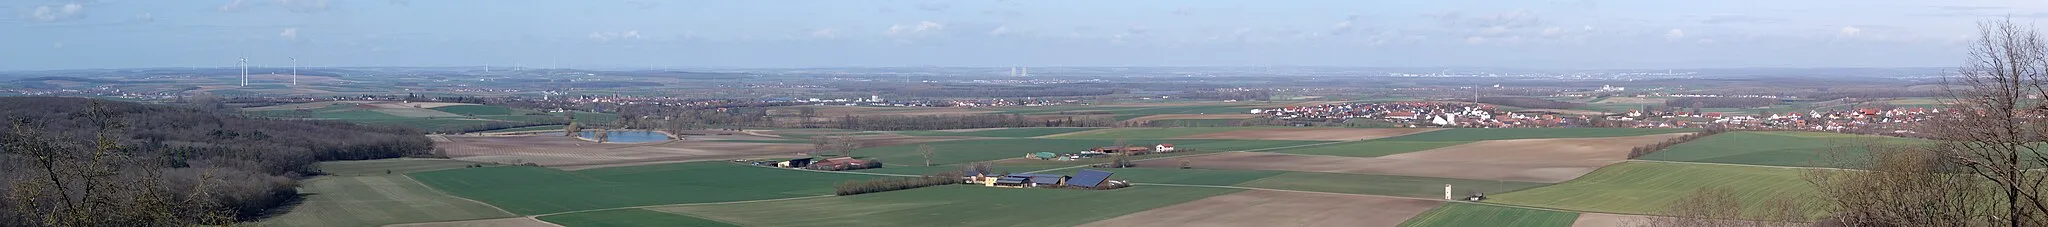 Photo showing: A panorama of the southeast of the district of Schweinfurt photographed from the Klinik am Steigerwald. On the right one can see the town of Dingolshausen and in the center, beyond the small lake, the town of Gerolzhofen can be seen. In the center background the nuclear power plant Grafenrheinfeld is visible and in the right the city of Schweinfurt can be seen.